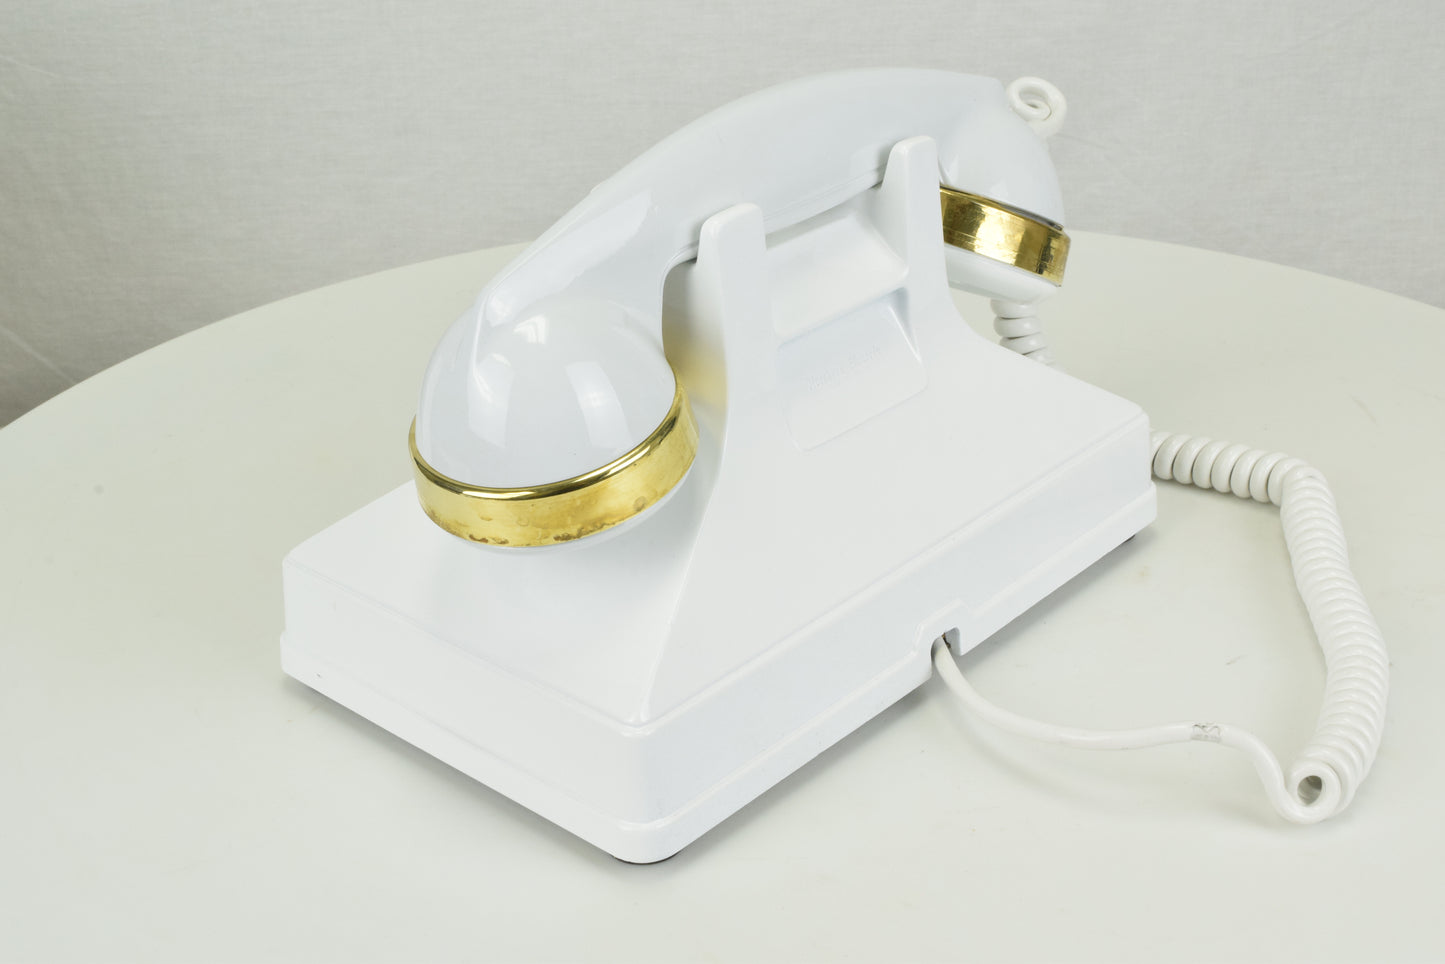 Northern Electric No. 1 Uniphone - White with Brass Trim